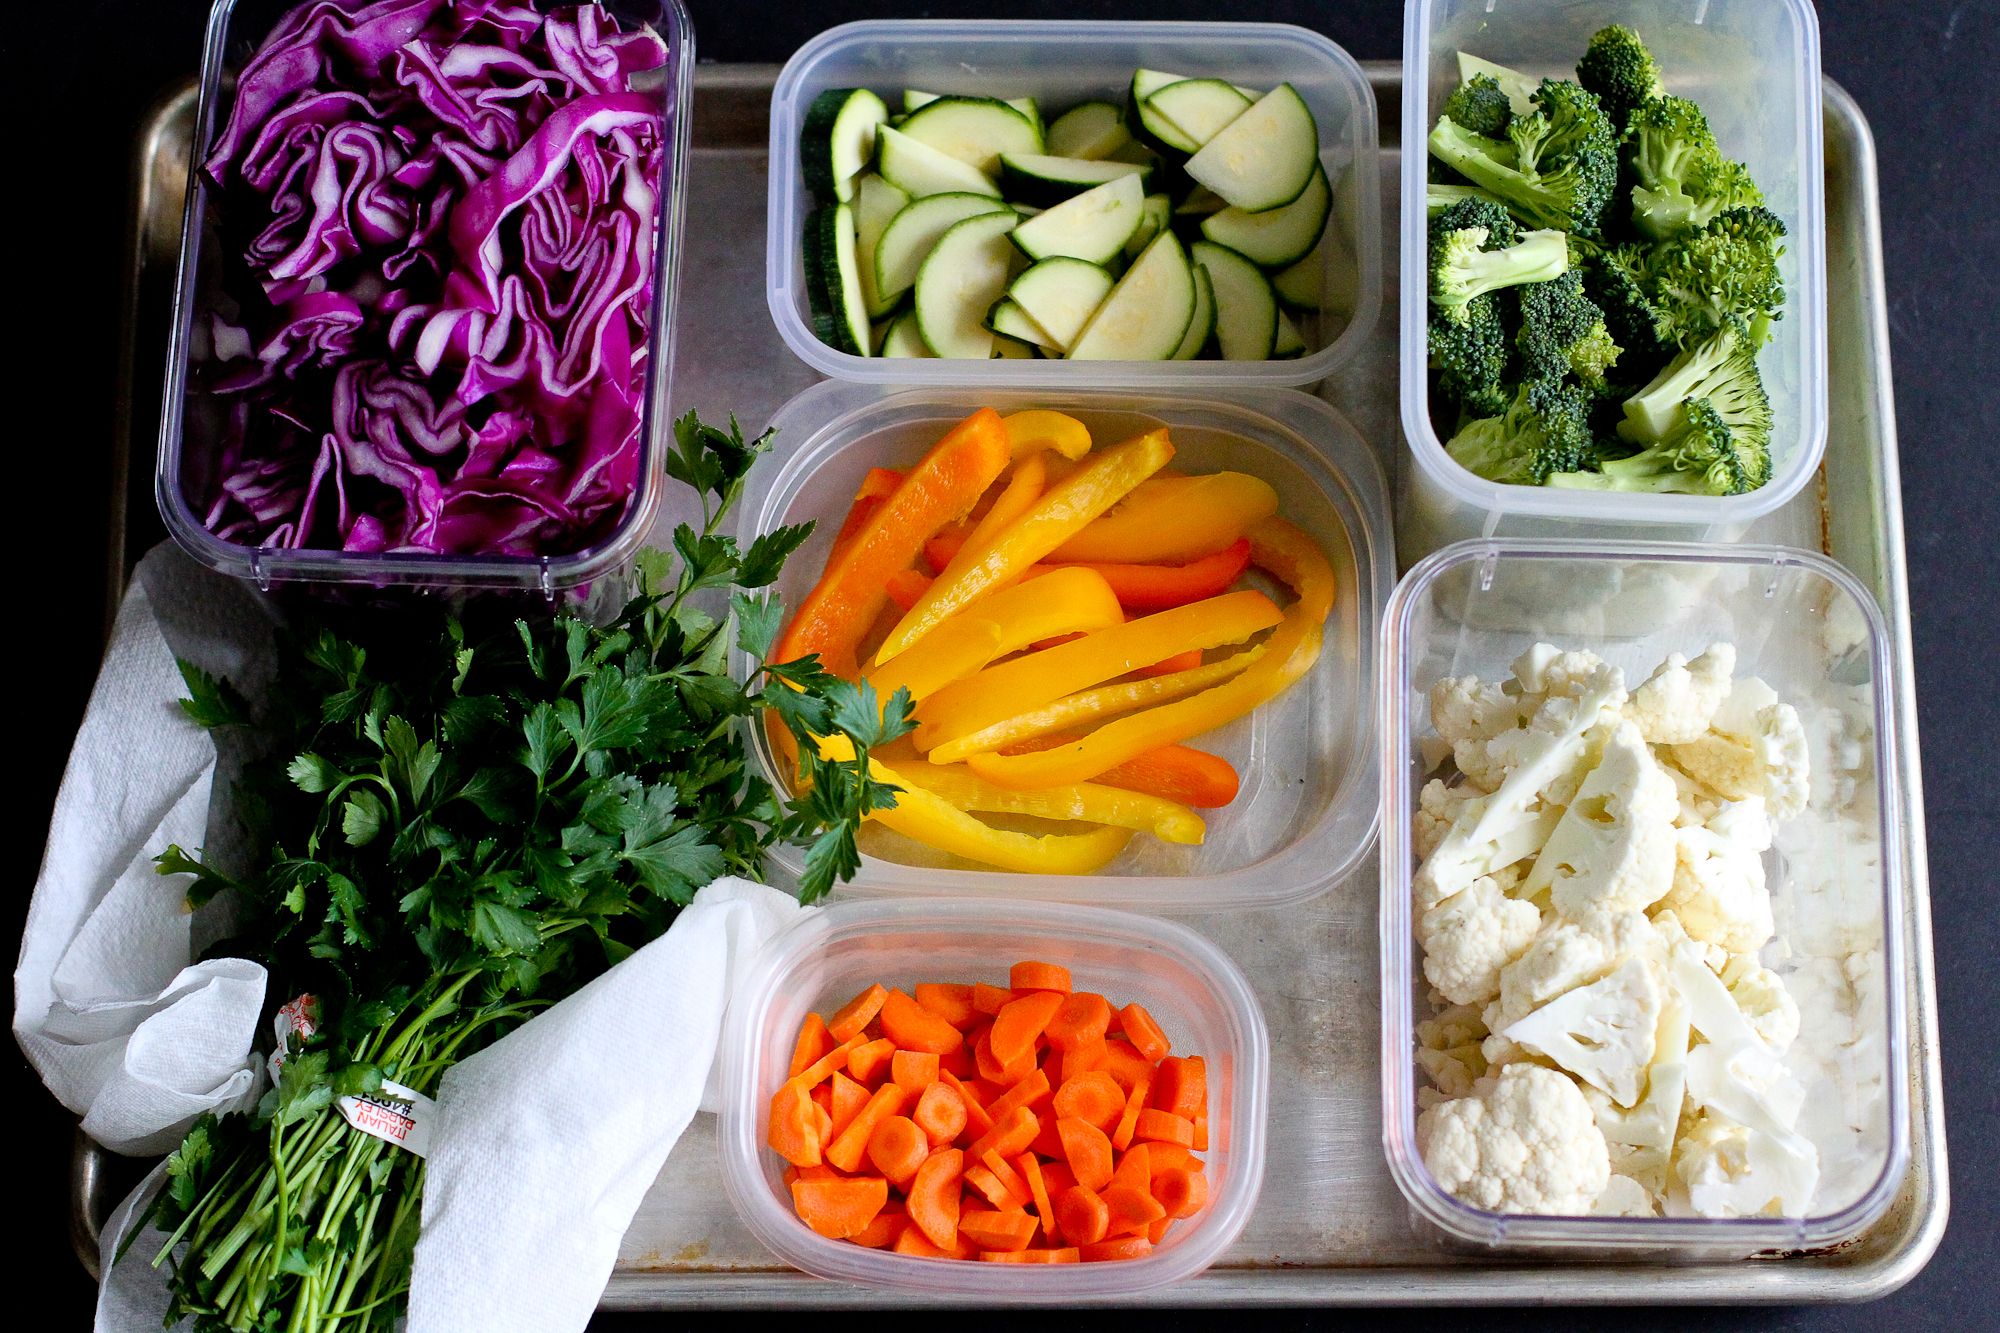 https://hips.hearstapps.com/thepioneerwoman/wp-content/uploads/2015/08/pwff-how-to-prep-vegetables-for-the-week-00.jpg